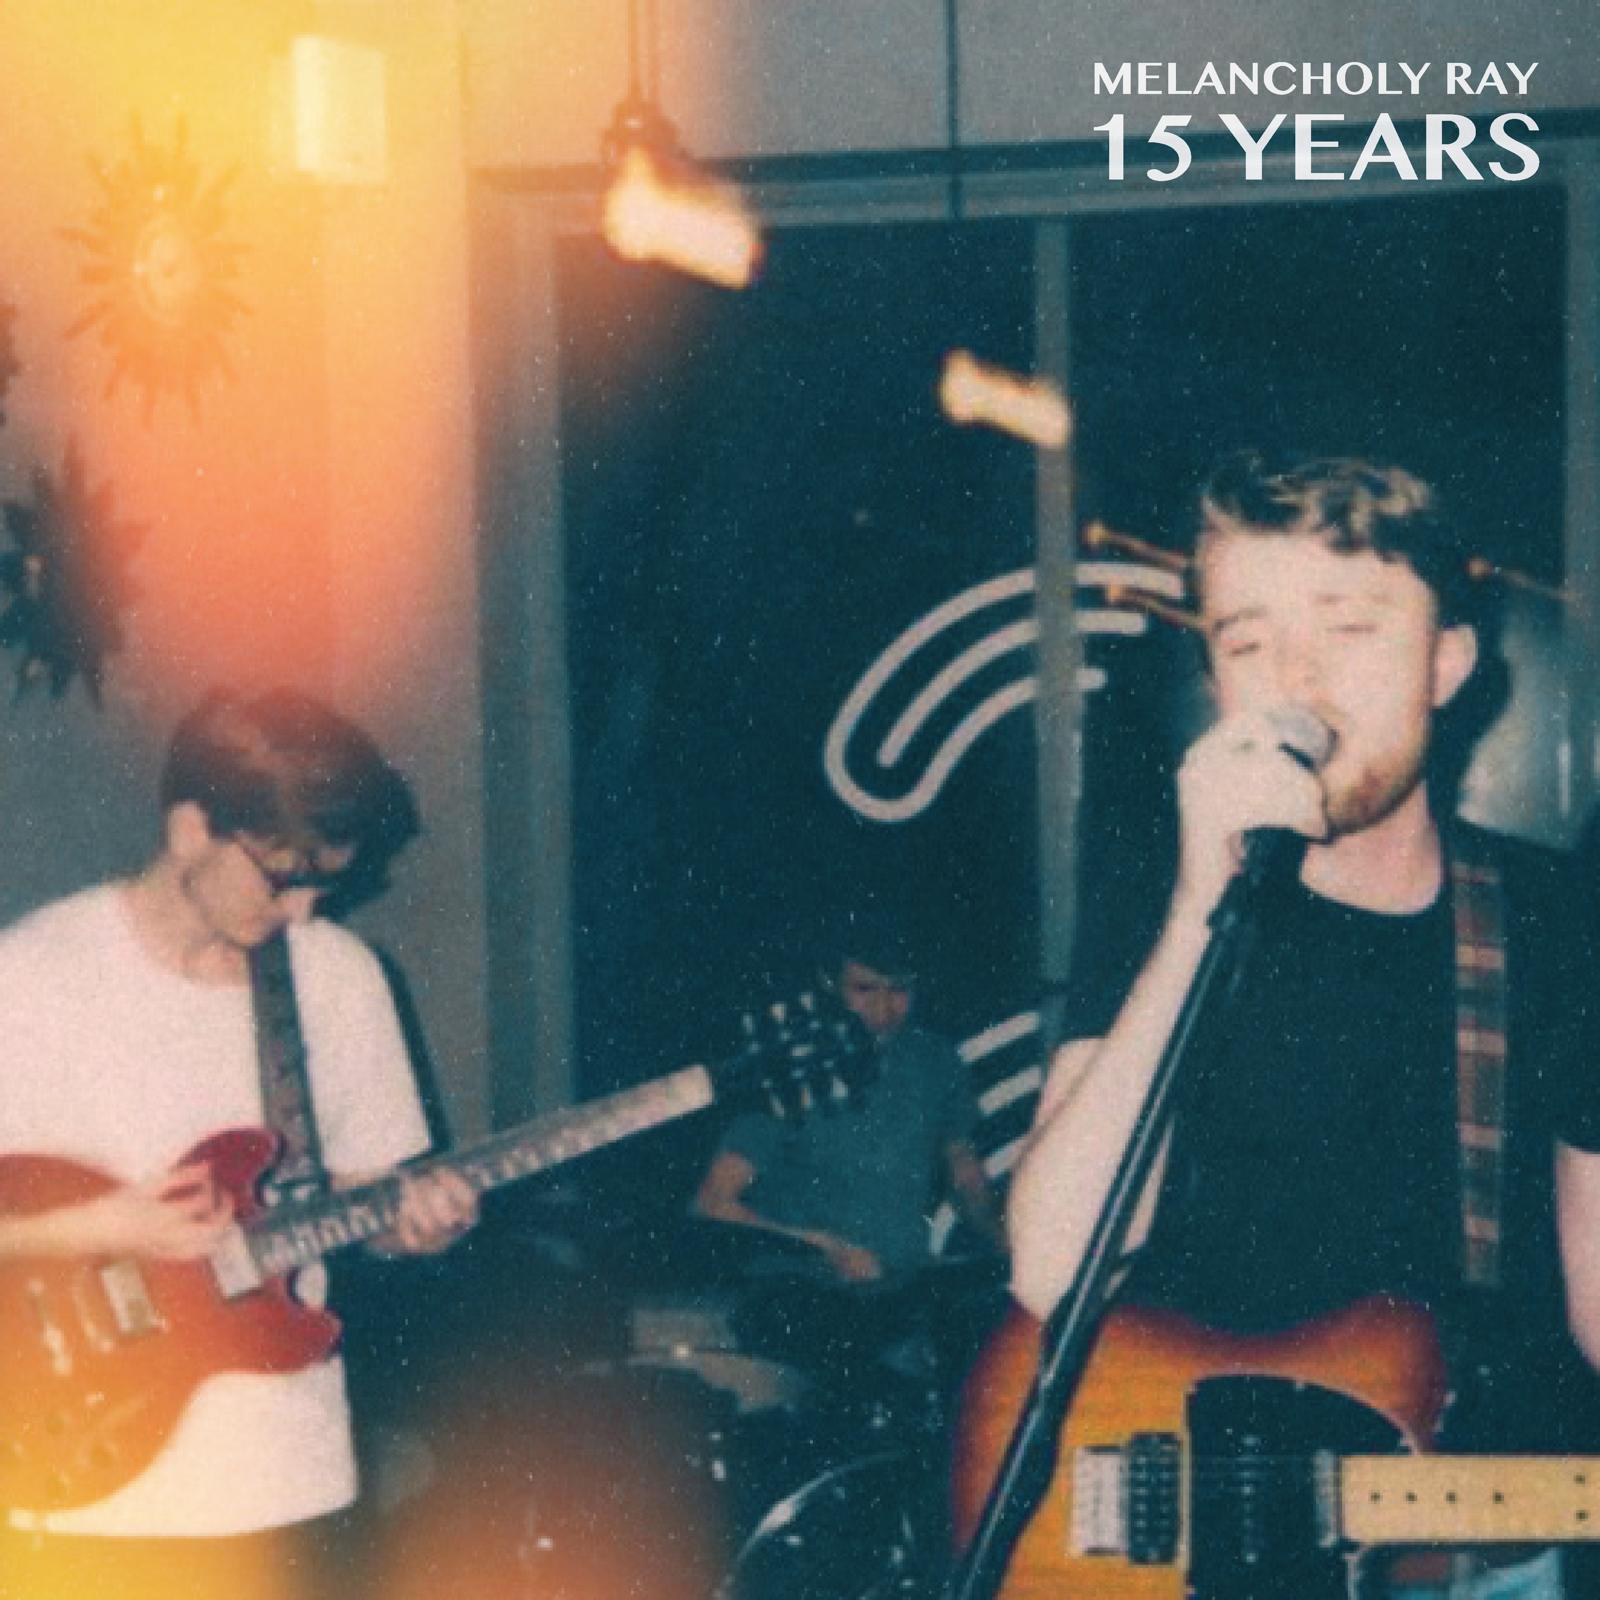 TRACK PREMIERE: Melancholy Ray drop their newest single '15 Years' today 